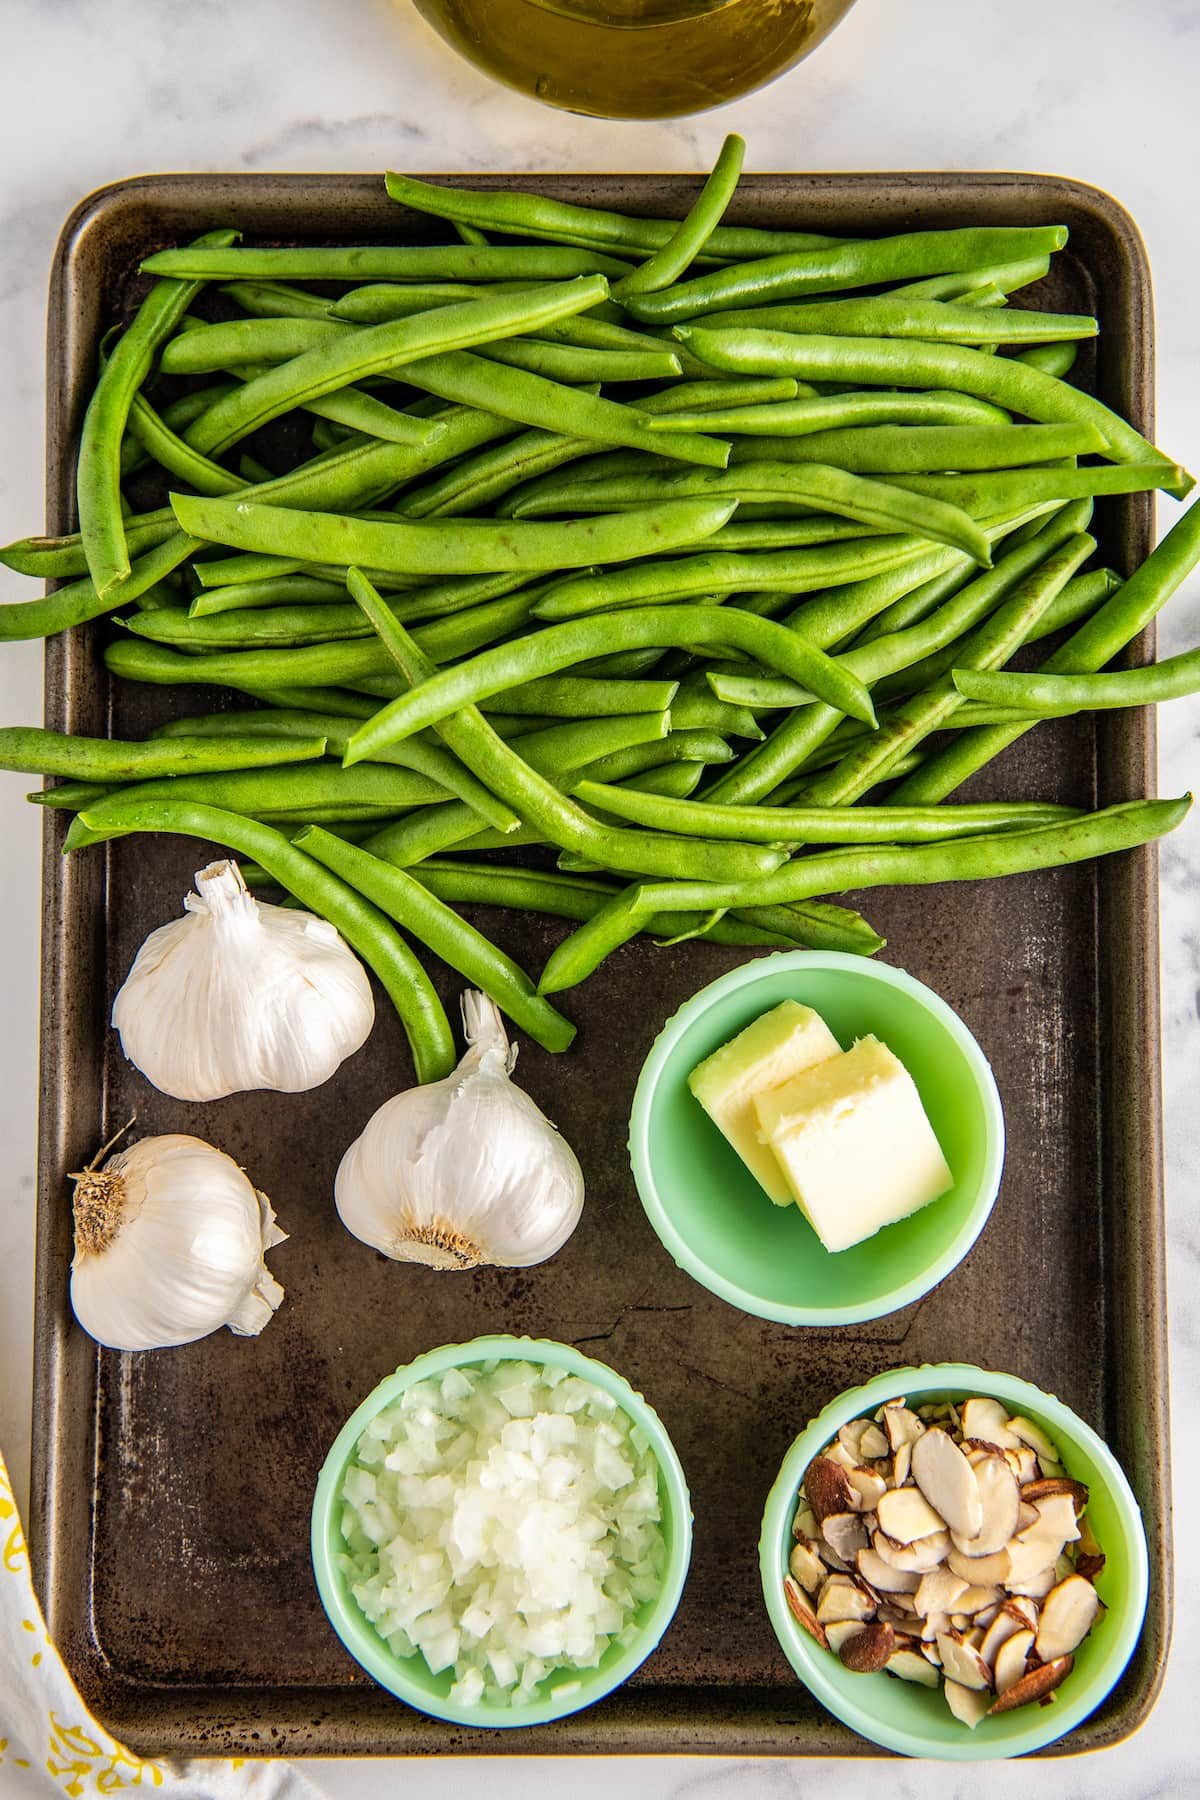 Overhead view of the ingredients needed for green beans almondine: raw green beans, three heads of garlic, a bowl of butter, a bowl of sliced almonds, and a bowl of diced shallot